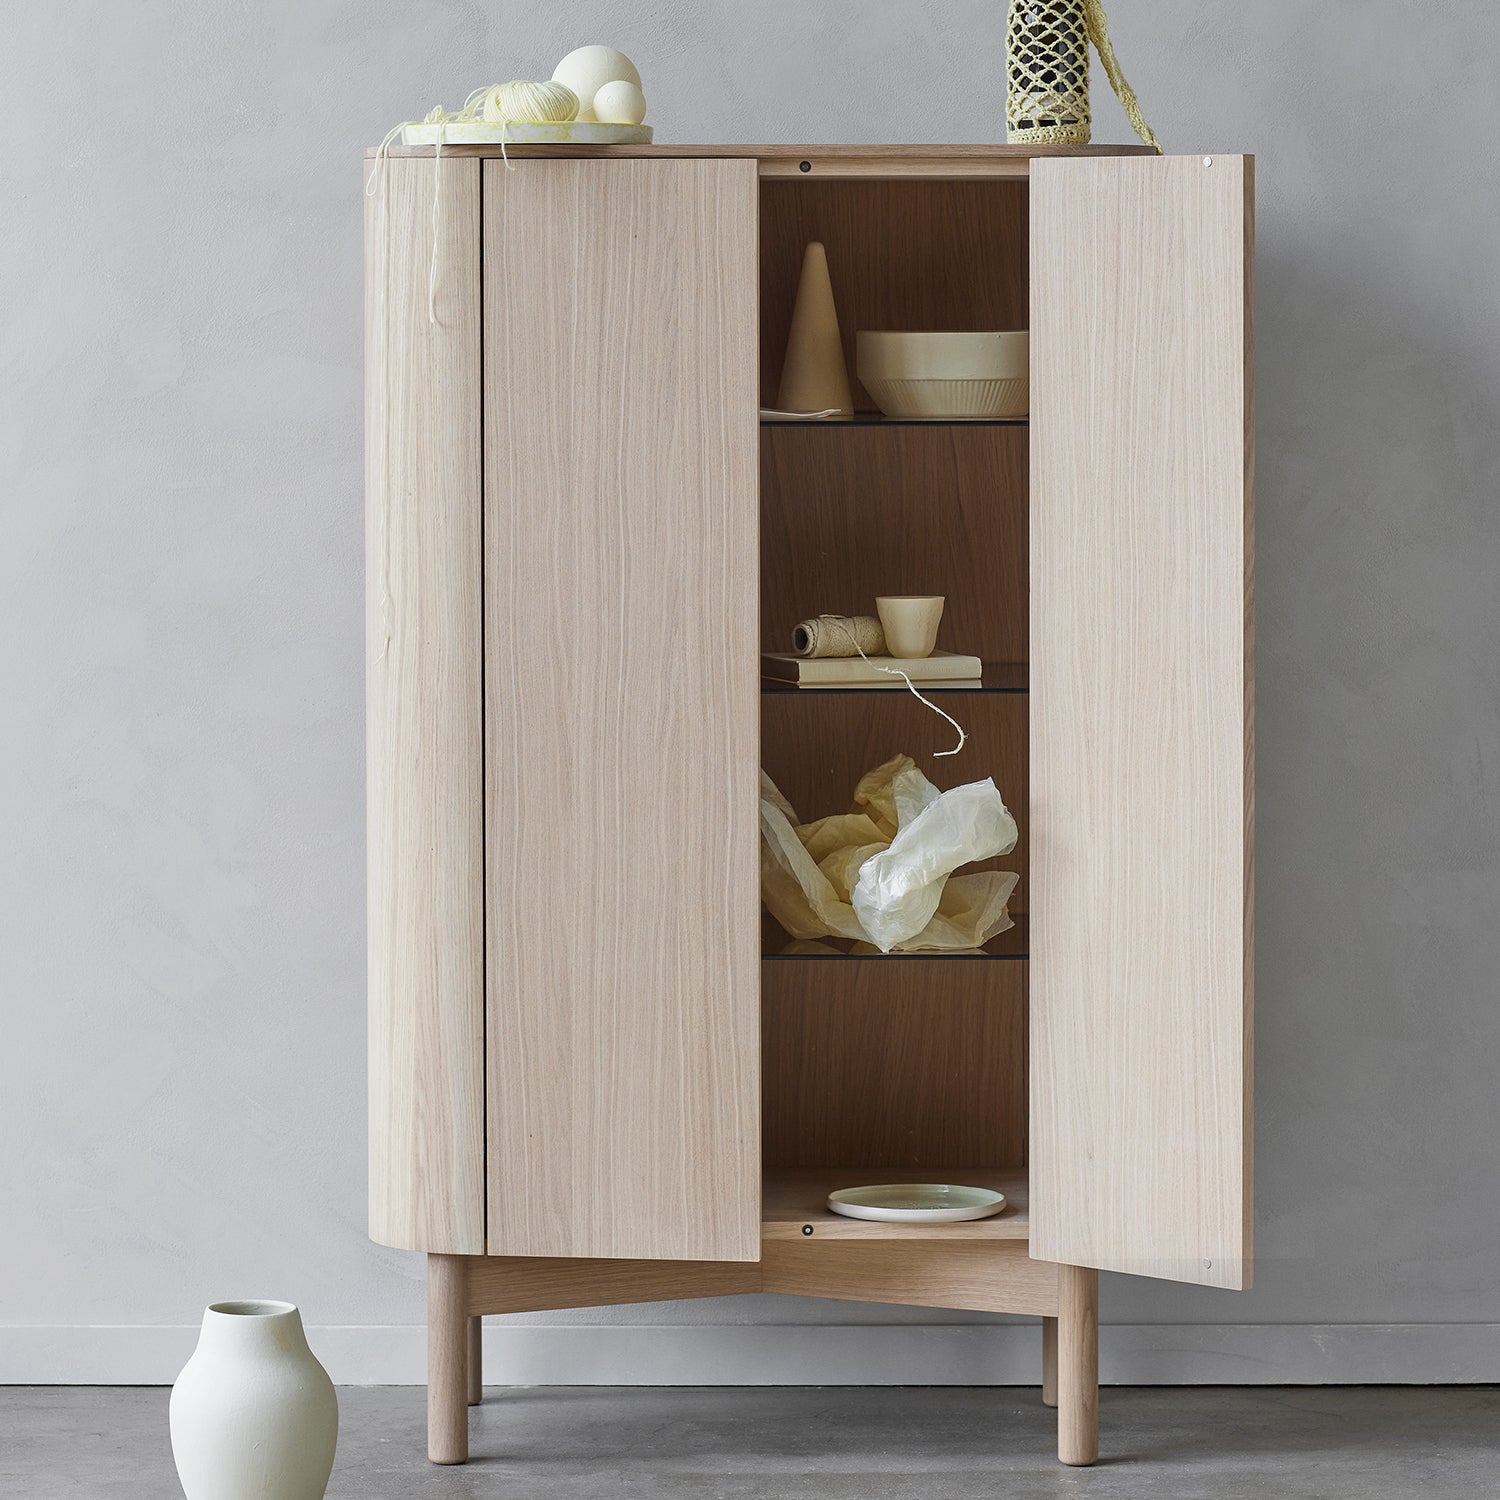 Loud Cabinet - The Design Choice